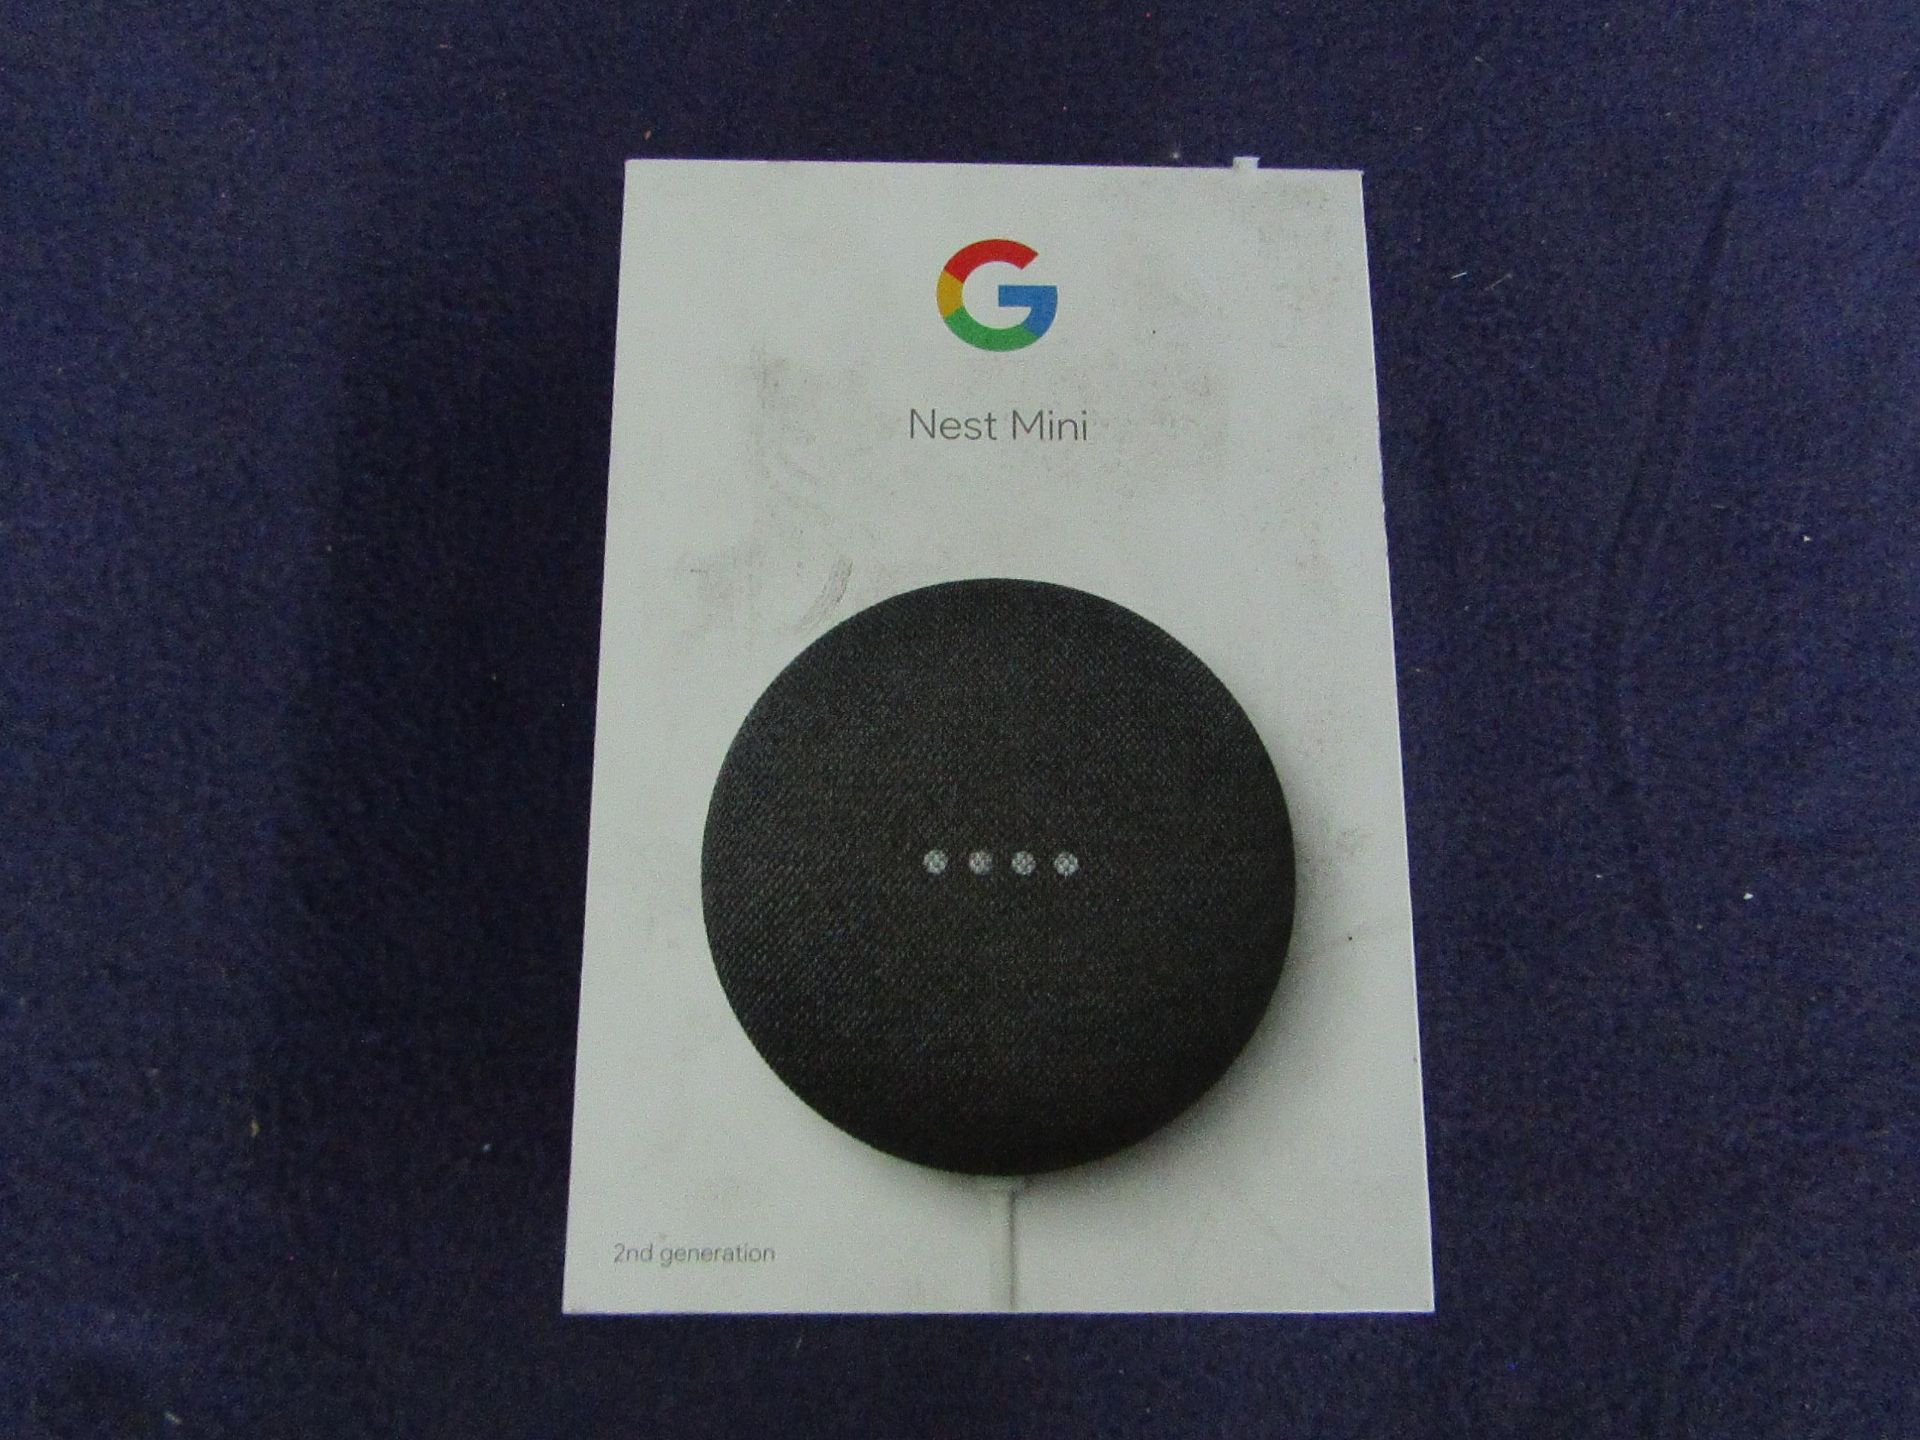 Google - Nest Mini Hub - Item Powers On But Have Not Tested Any Further, Comes In Original Box.